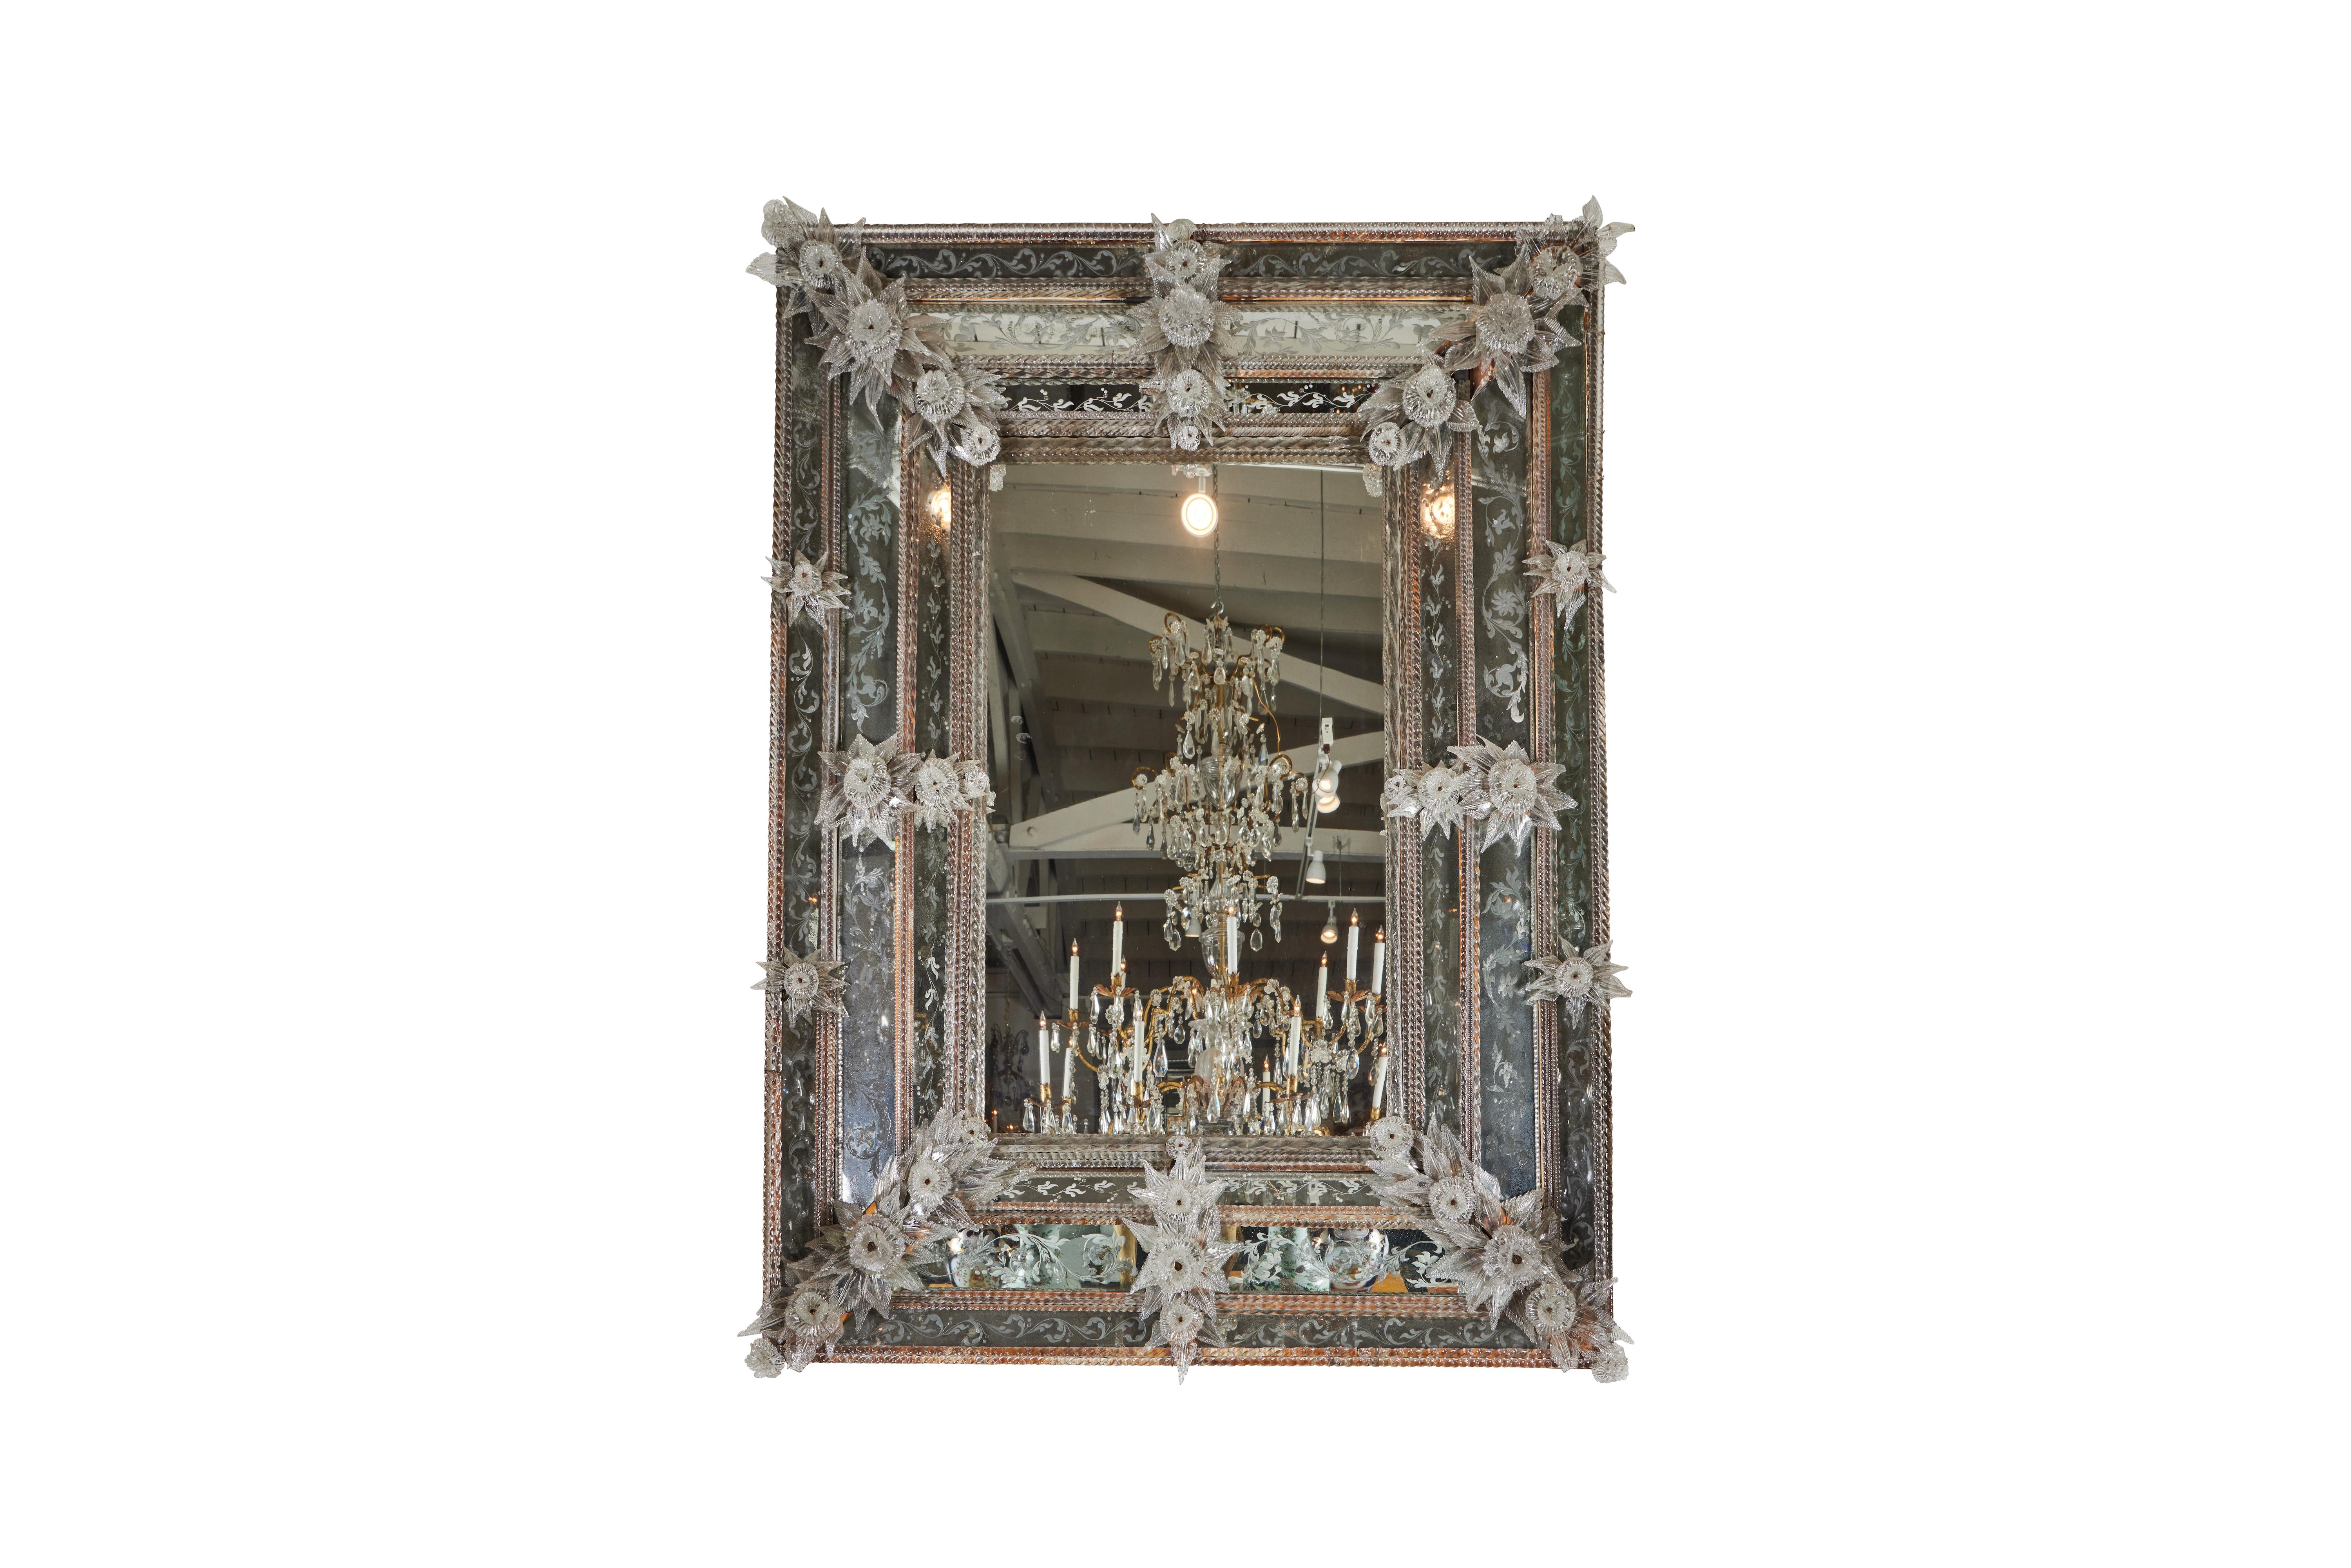 An elaborate, grand scaled, all hand blown and etched glass Venetian mirror with foliate and floral designs. From the area of Venice.